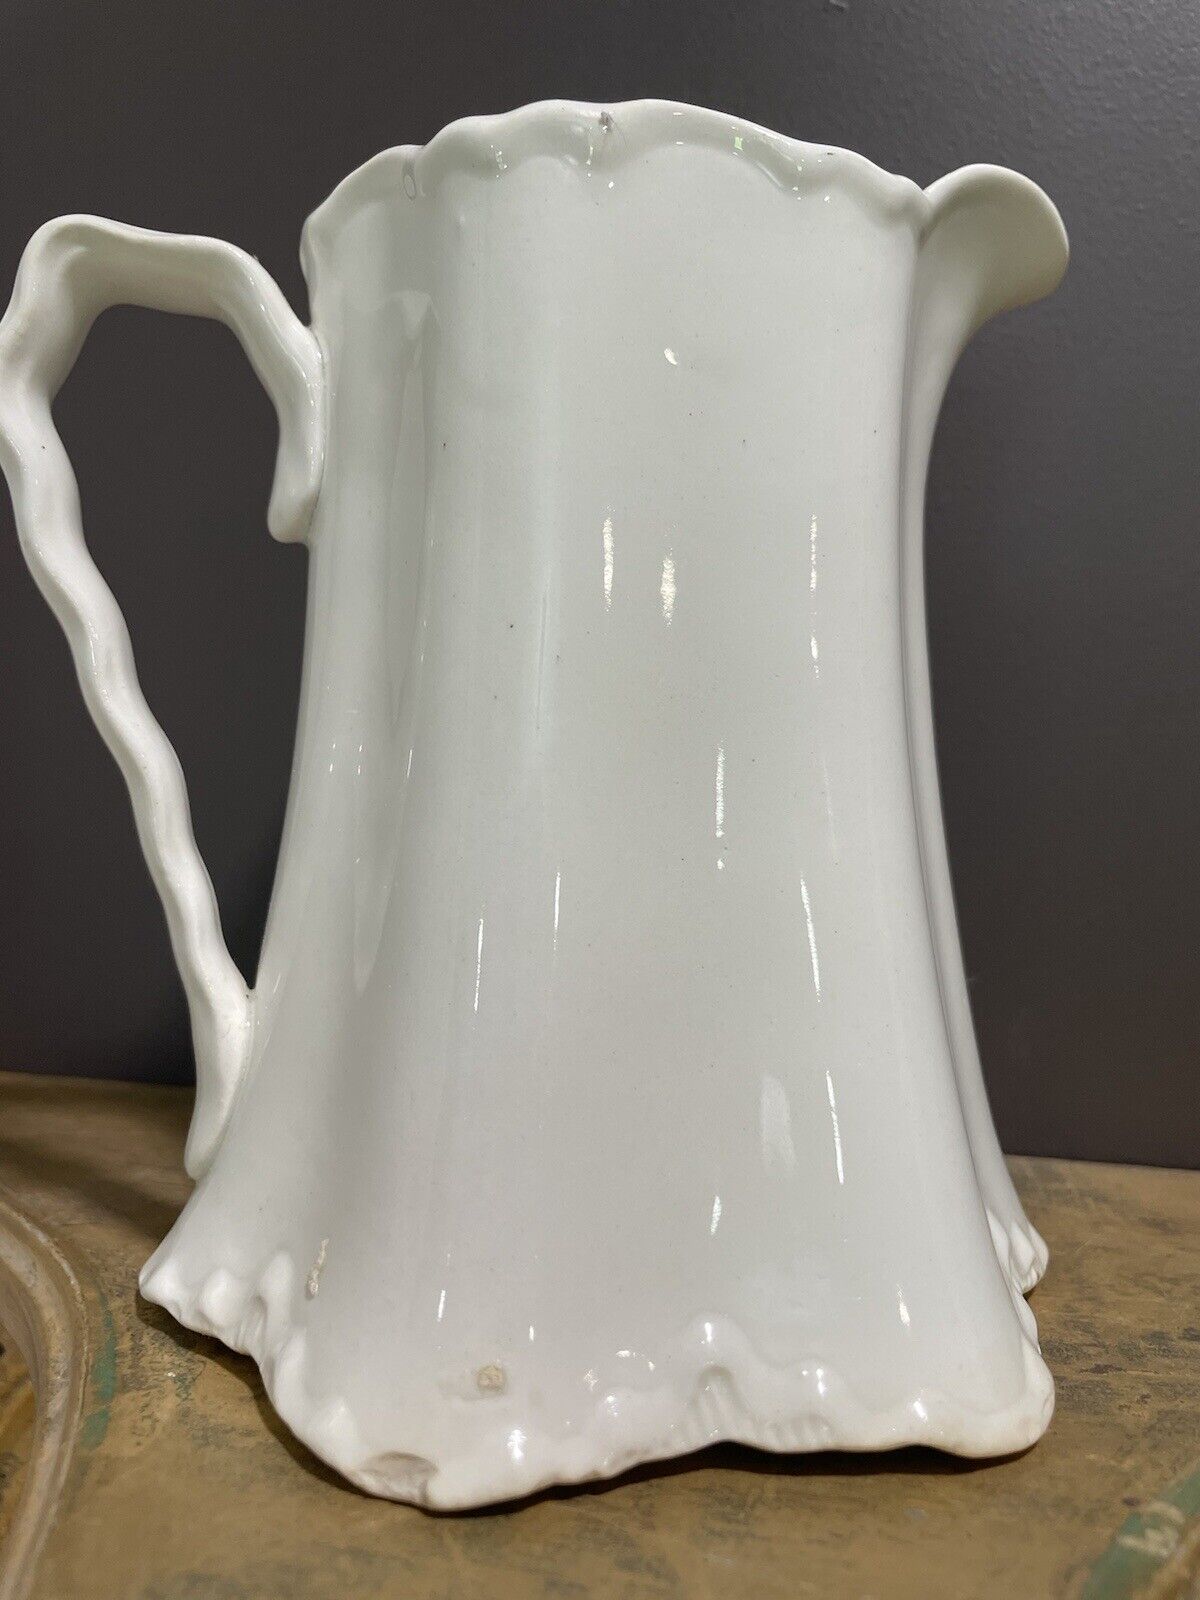 Antique George Brothers Rainier White Milk Pitcher Ruffled Top Scalloped Edges